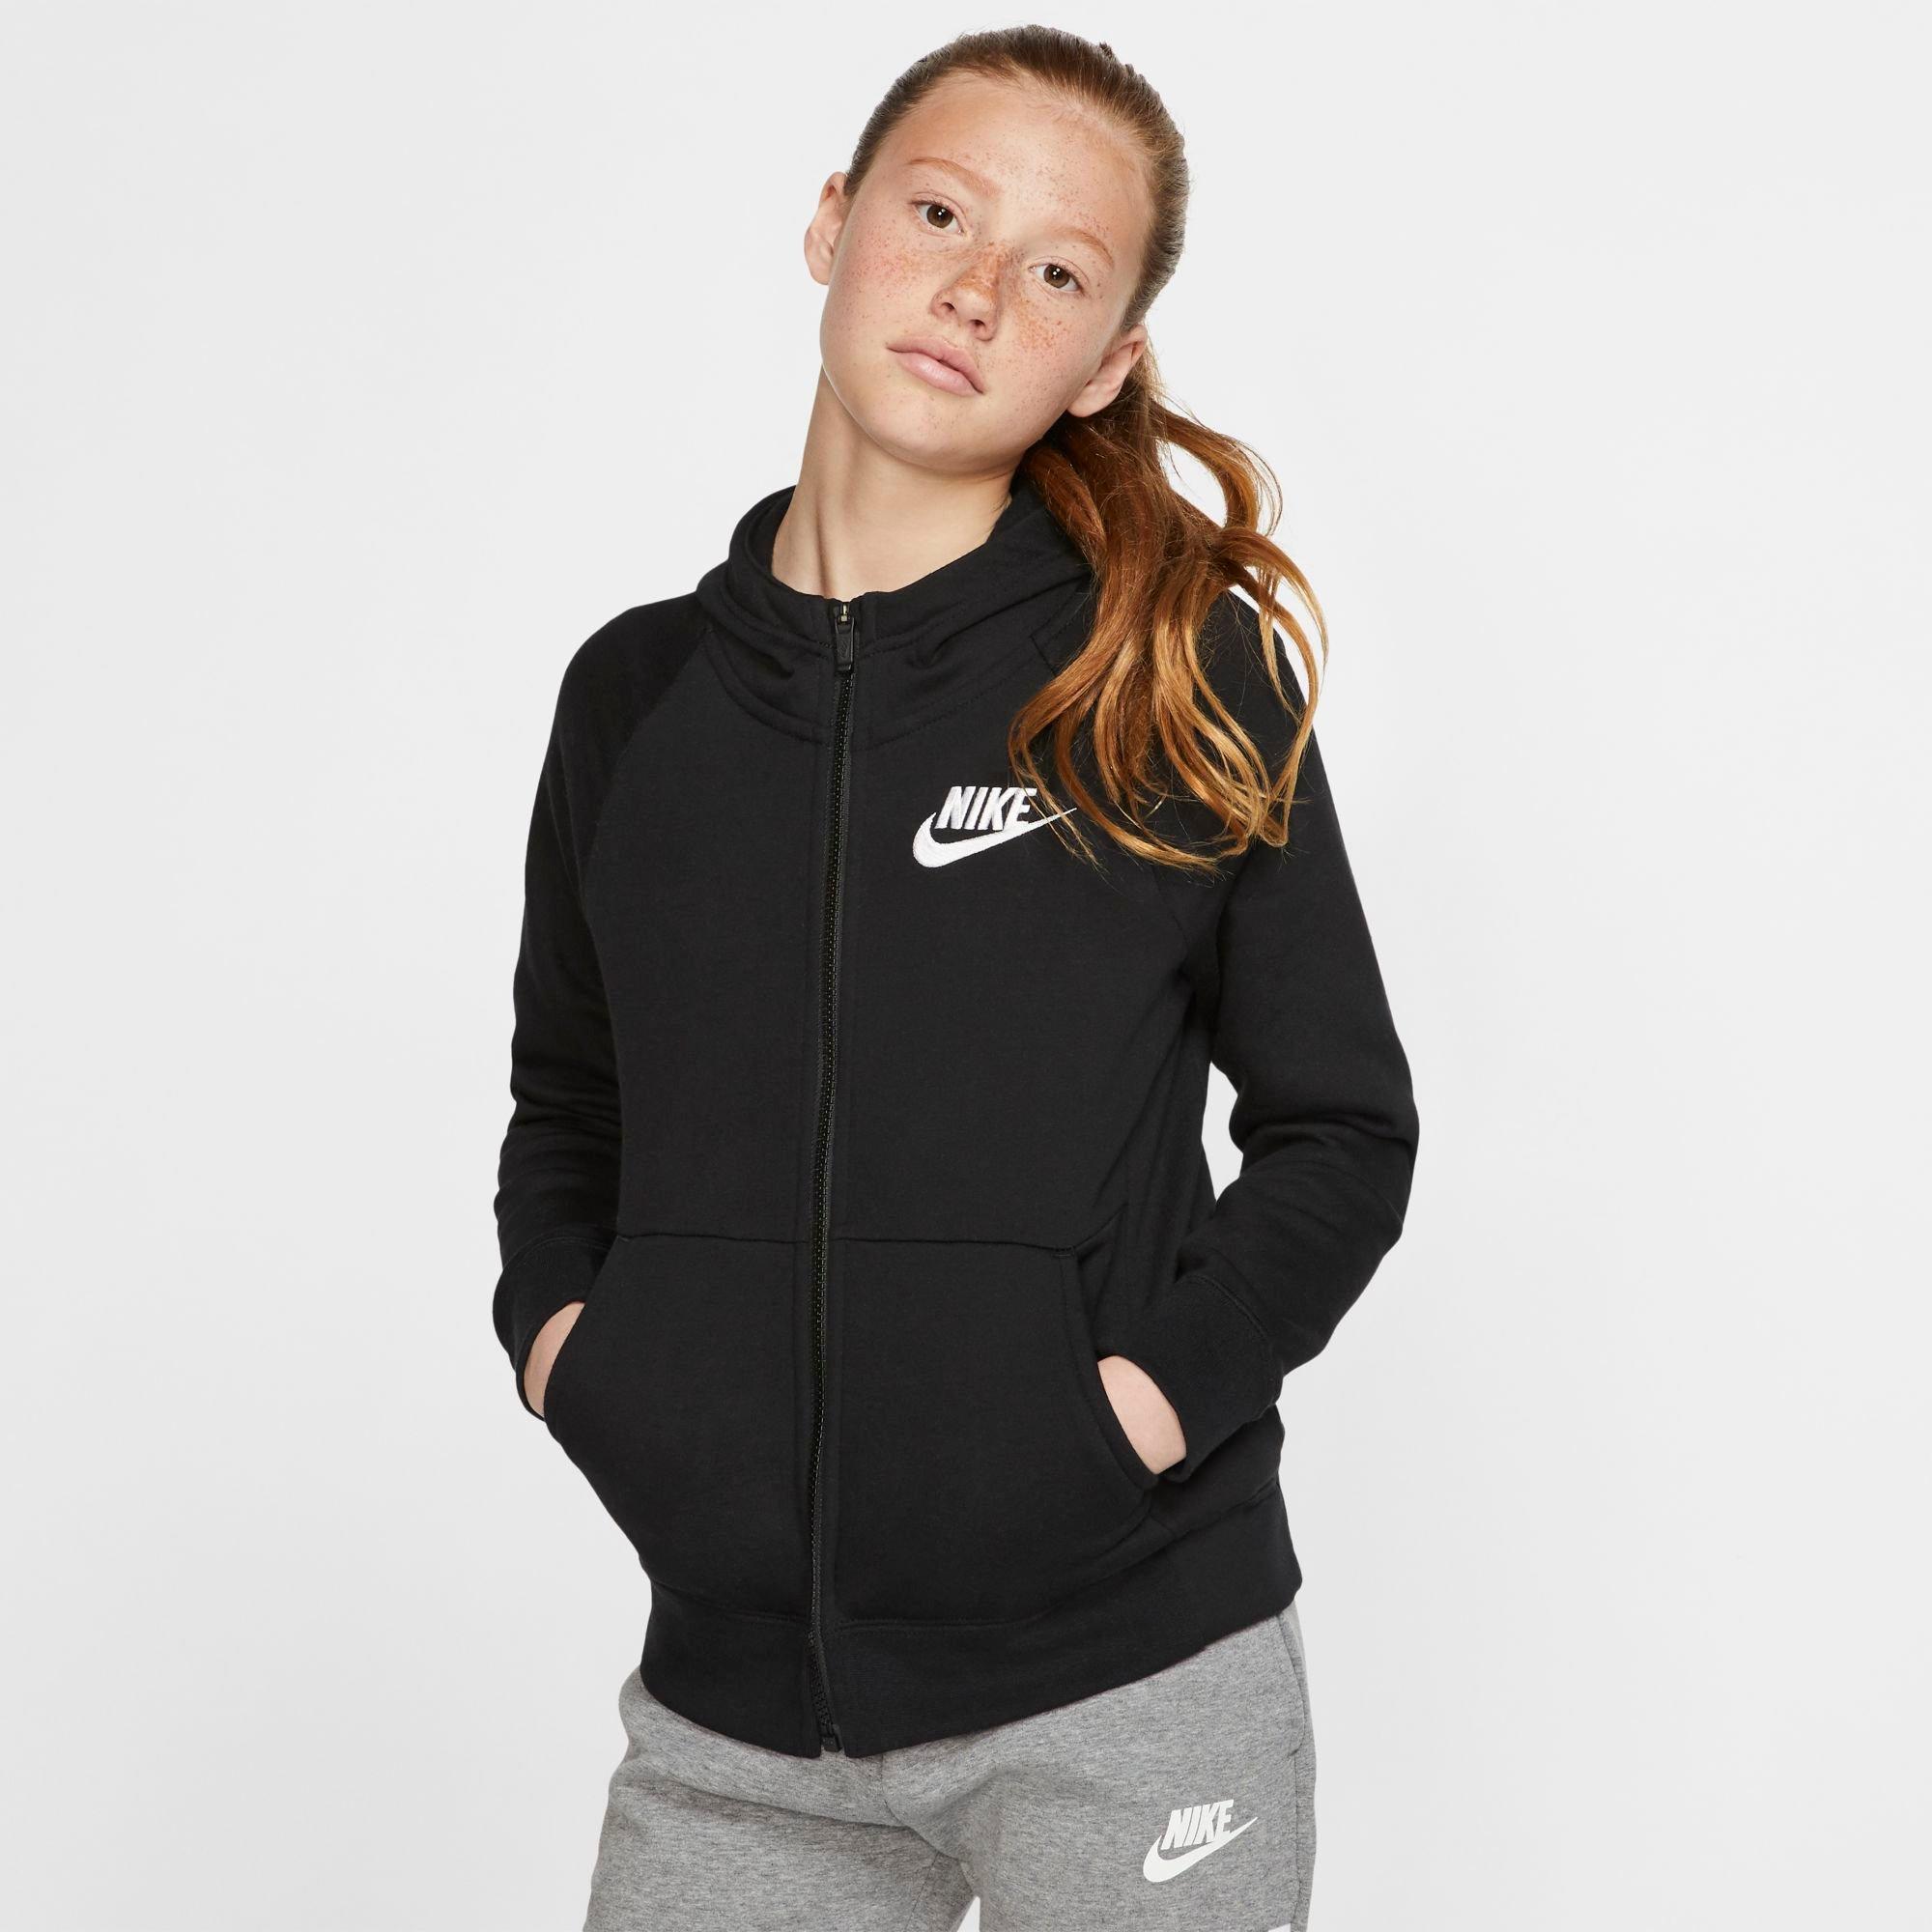 nike childrens clothes